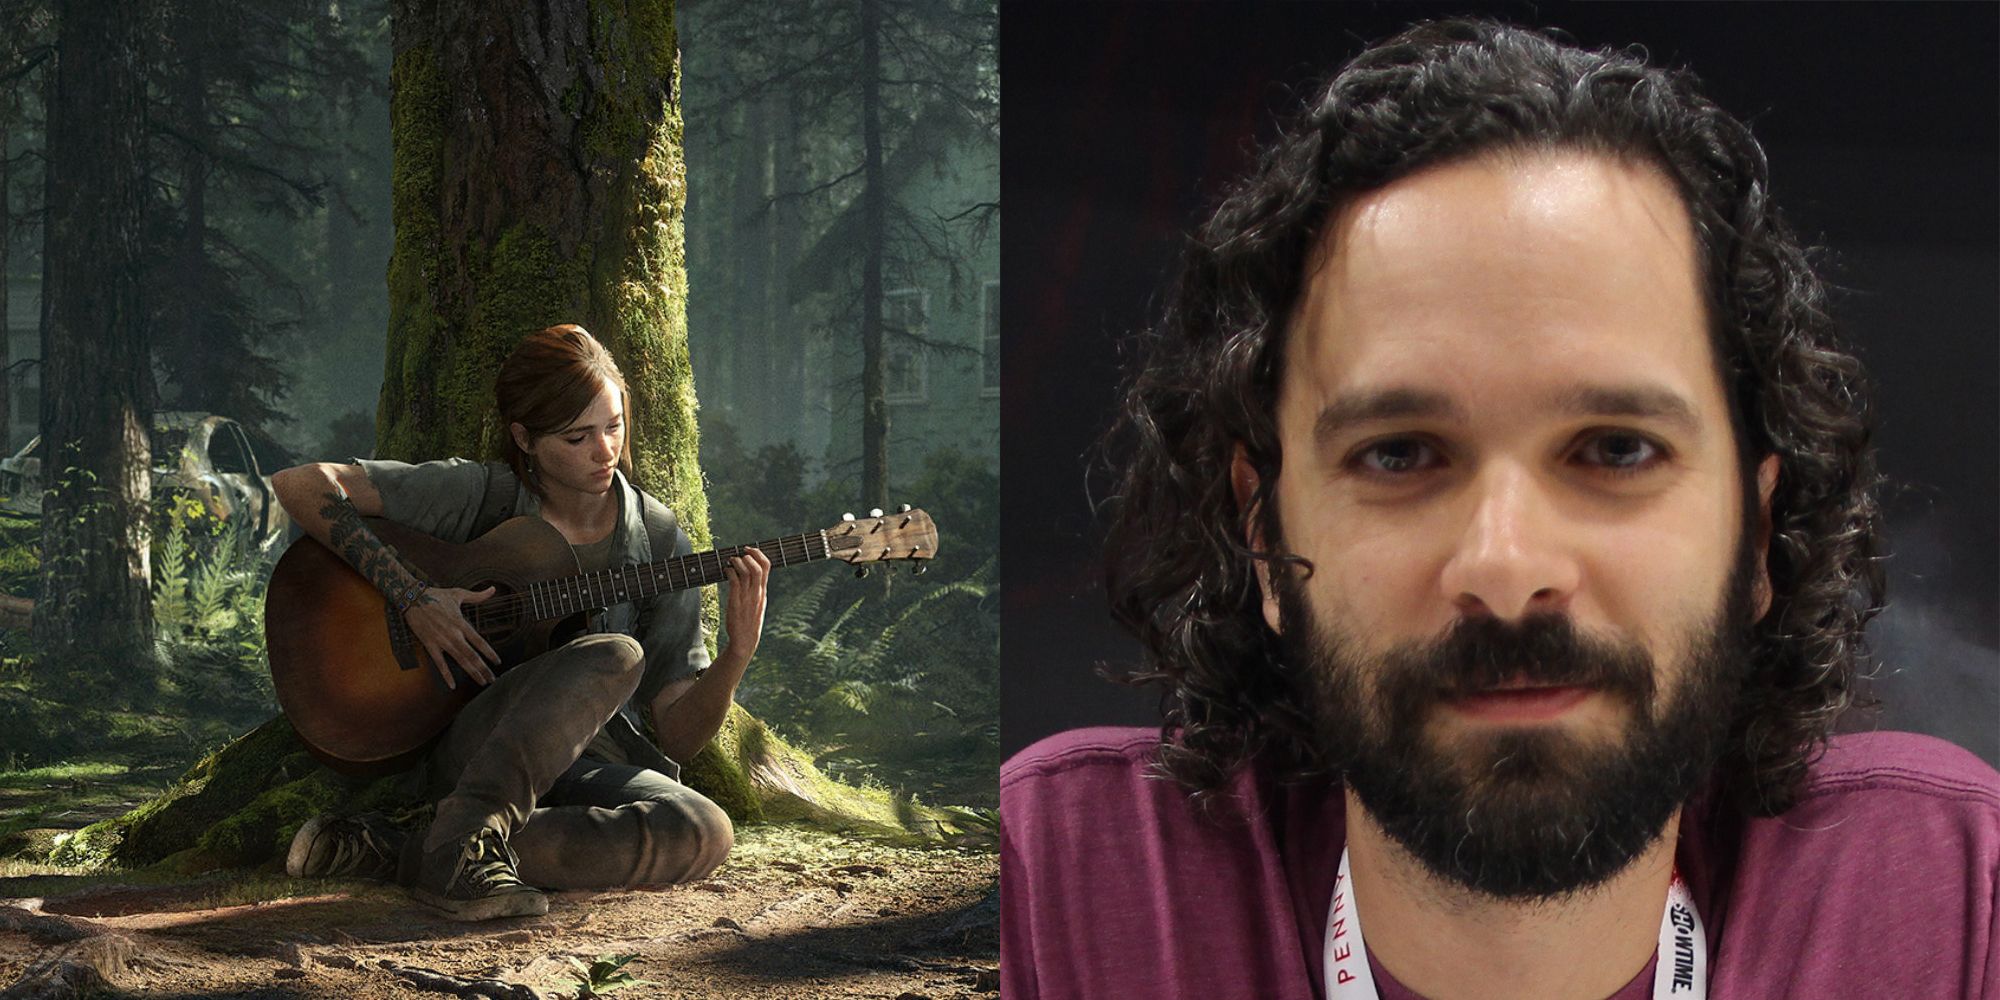 Neil Druckmann is a writer, director, and co-president of 'Naughty